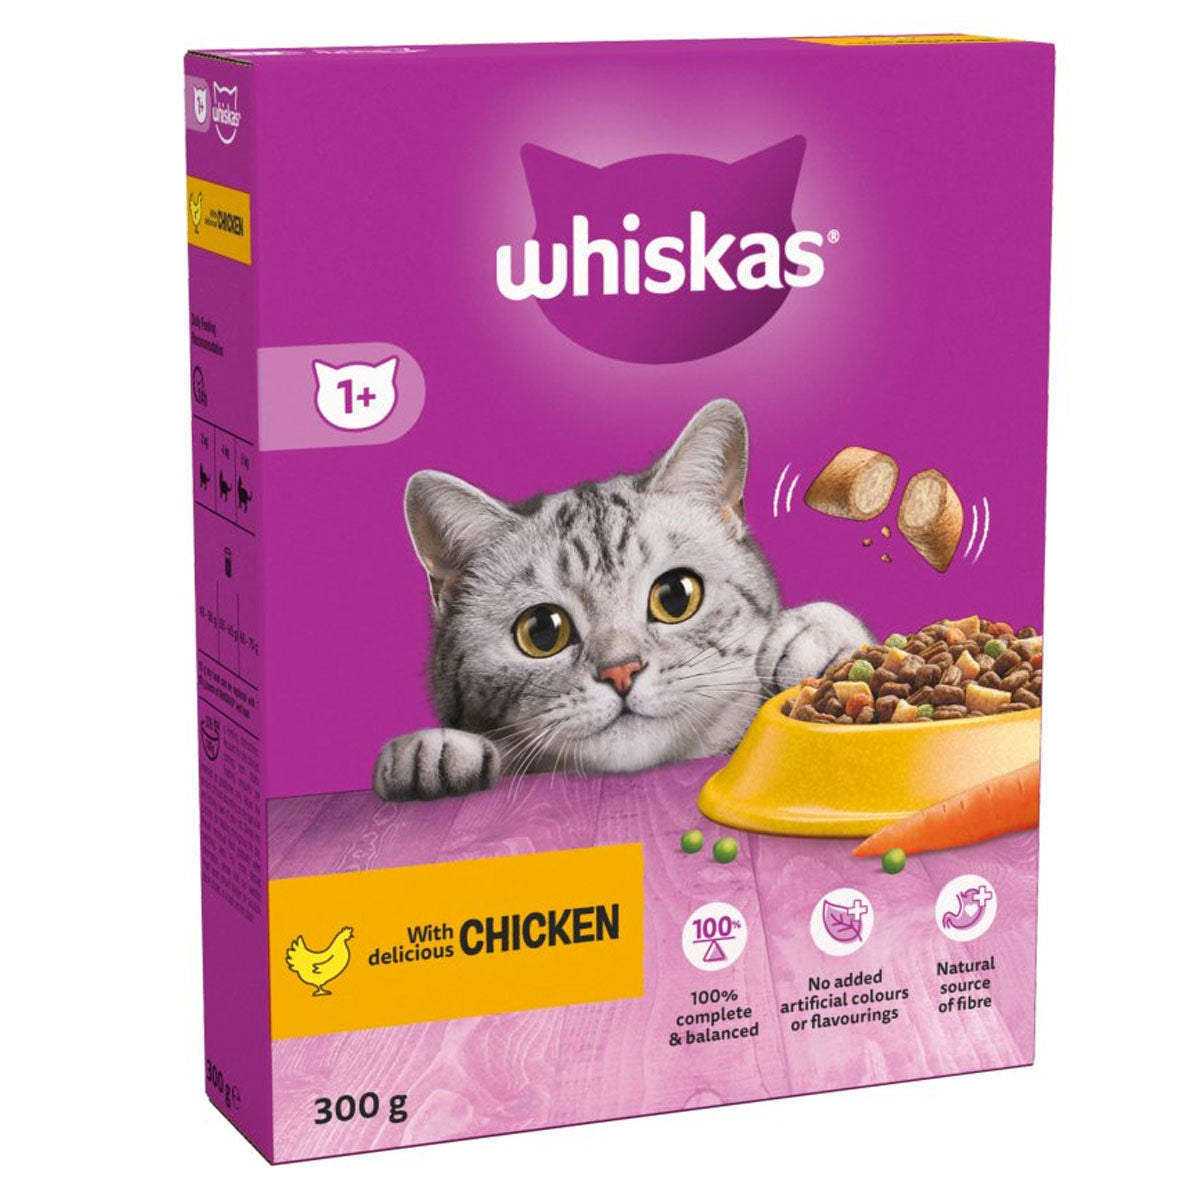 Whiskas - 1+ Adult Dry Cat Food with Chicken - 300g - Continental Food Store